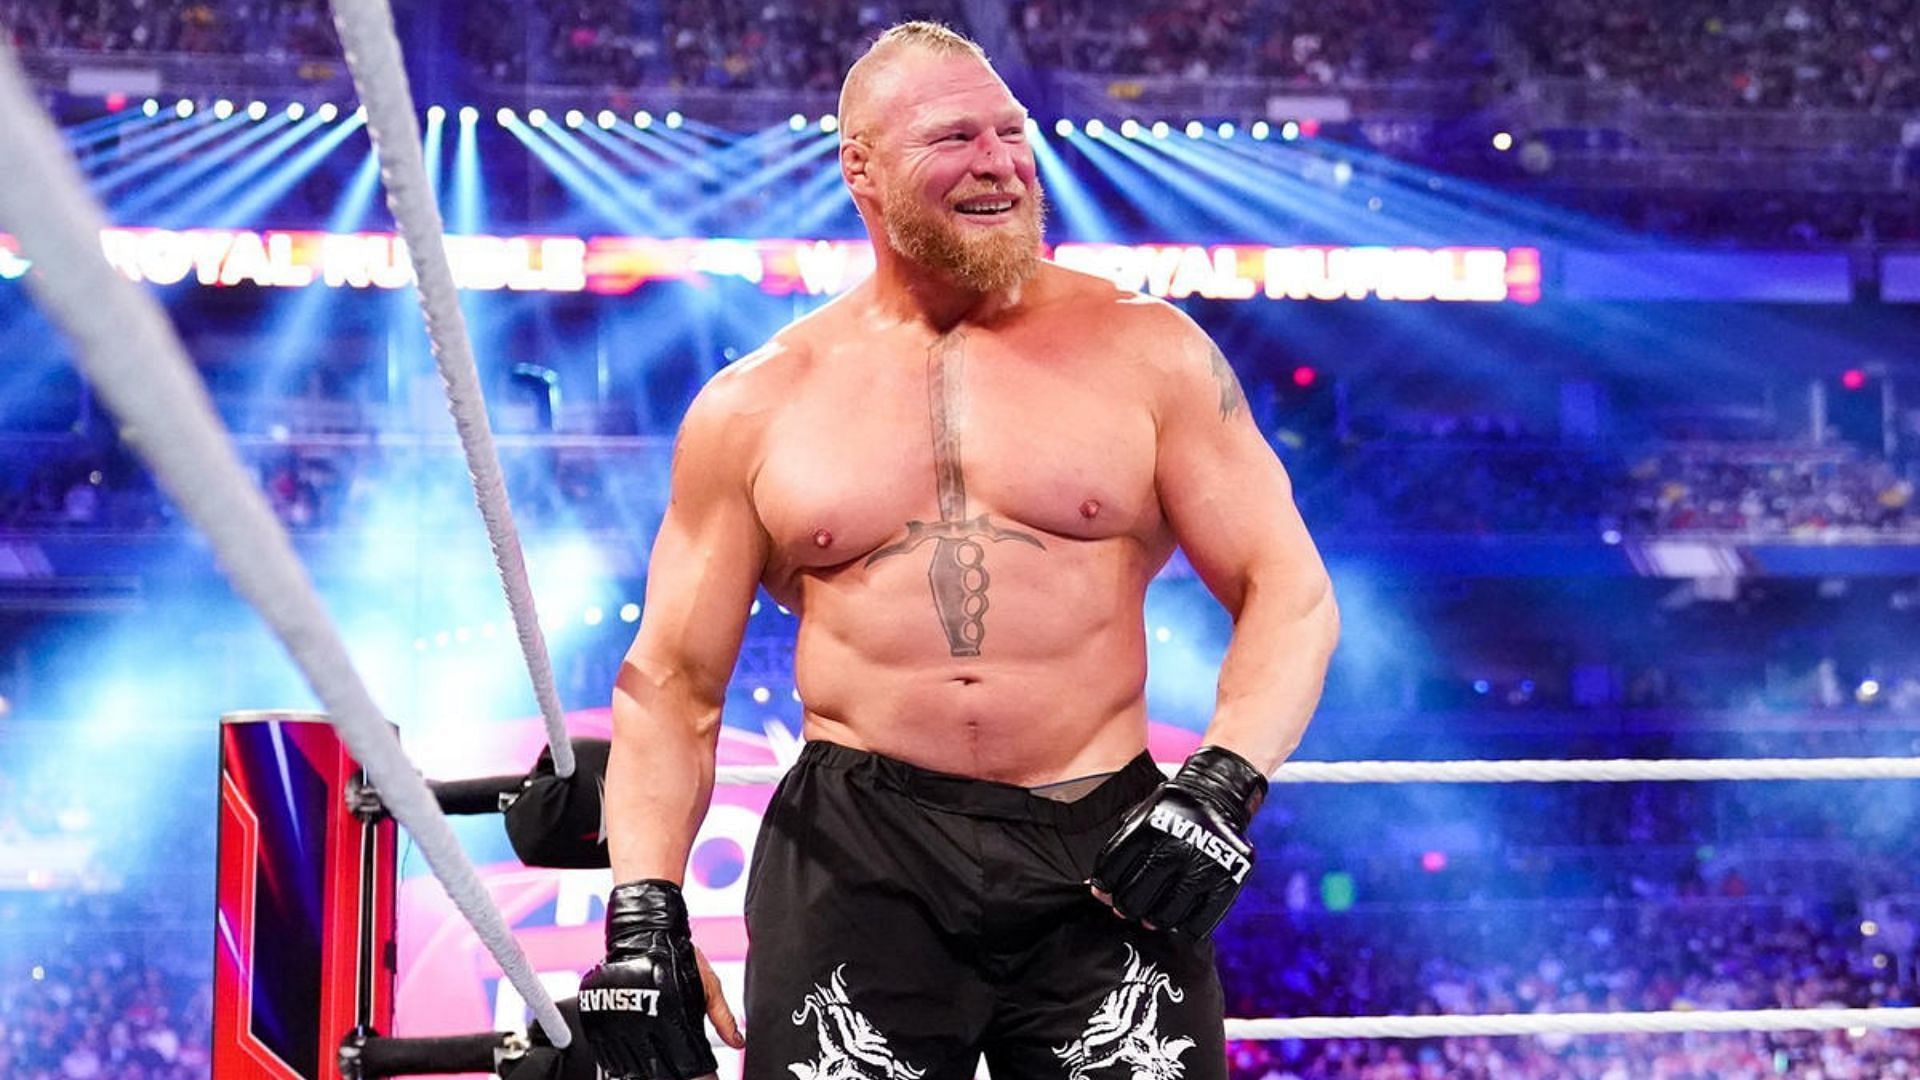 Brock Lesnar could be returning to WWE very soon